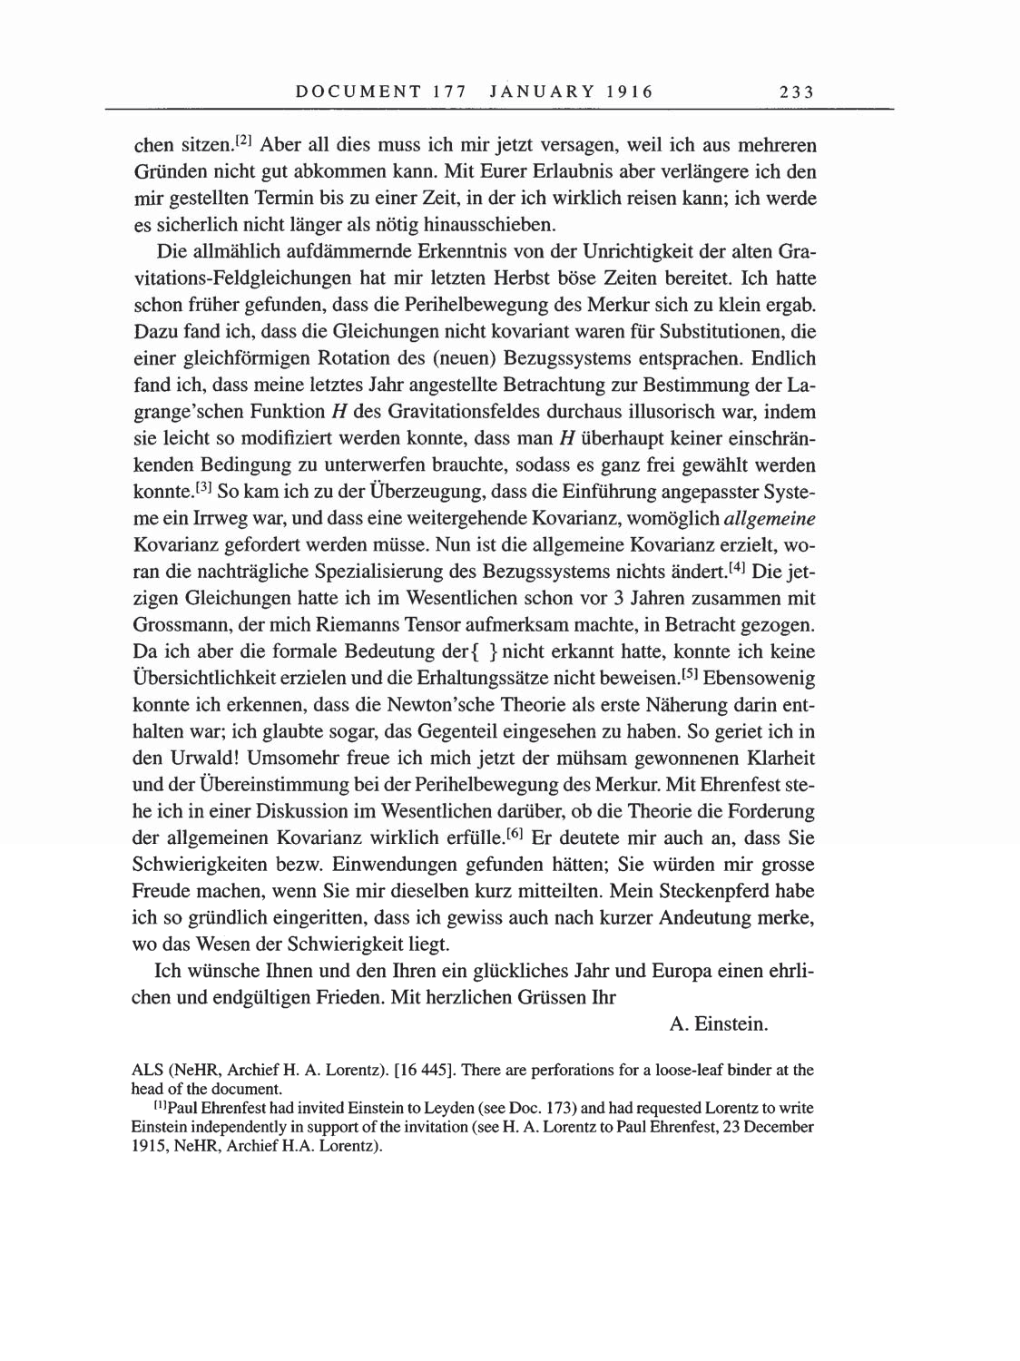 Volume 8, Part A: The Berlin Years: Correspondence 1914-1917 page 233